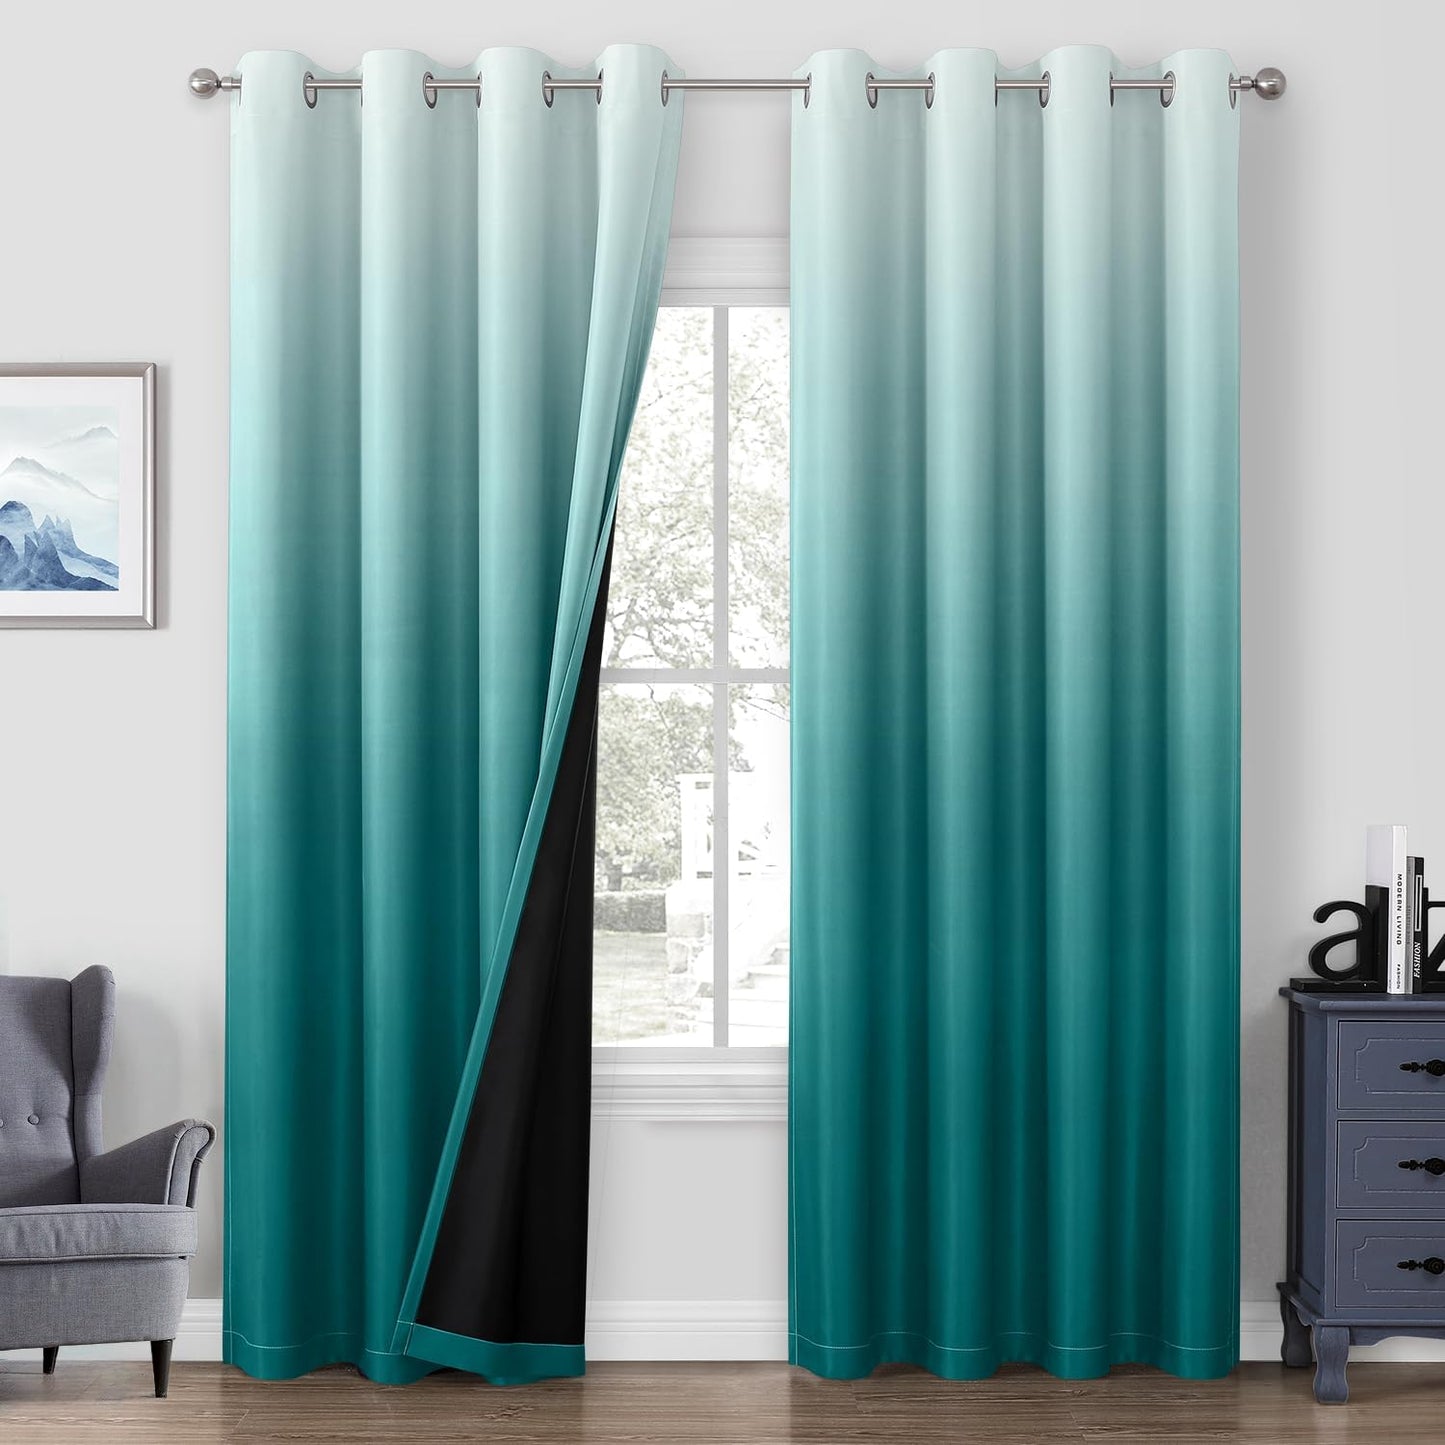 HOMEIDEAS 100% Black Ombre Blackout Curtains for Bedroom, Room Darkening Curtains 52 X 84 Inches Long Grommet Gradient Drapes, Light Blocking Thermal Insulated Curtains for Living Room, 2 Panels  HOMEIDEAS Teal 2 Panel-52" X 96" 